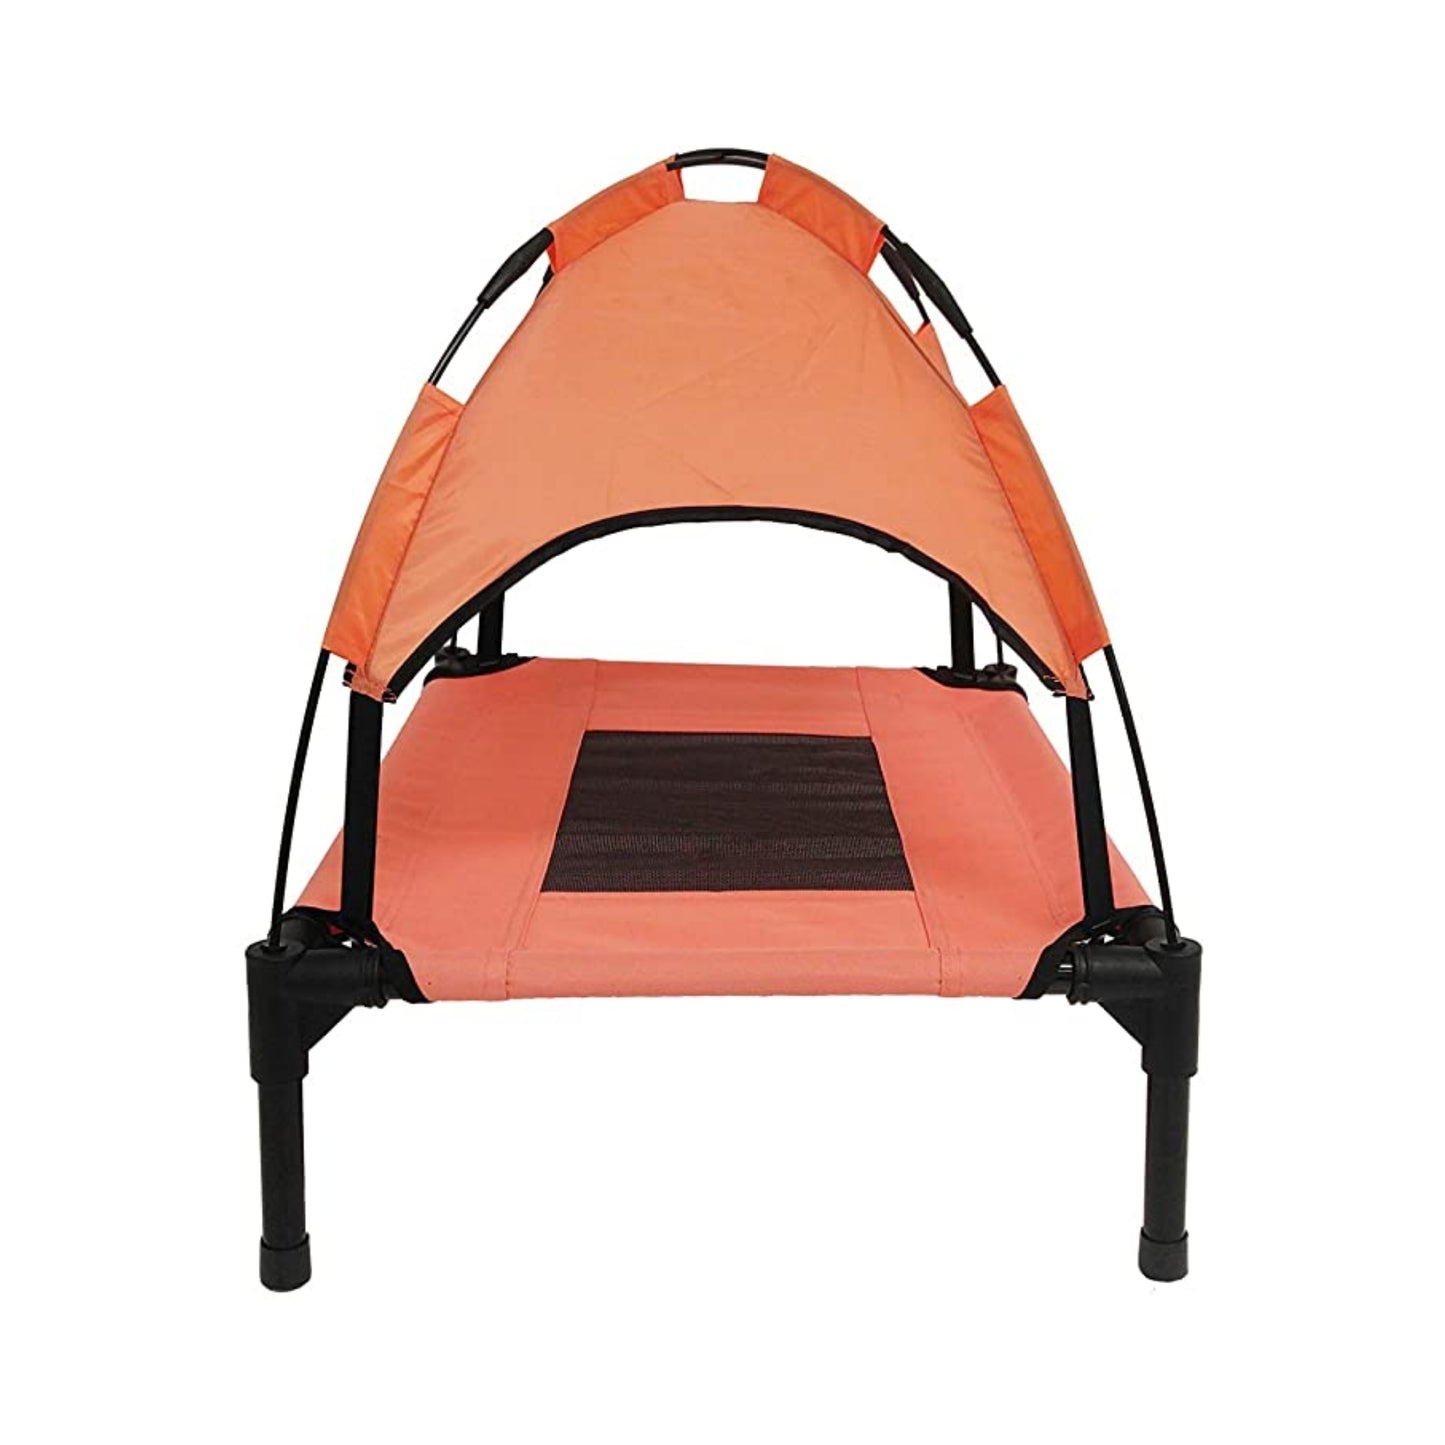 Midlee Salmon Dog Cot with Canopy